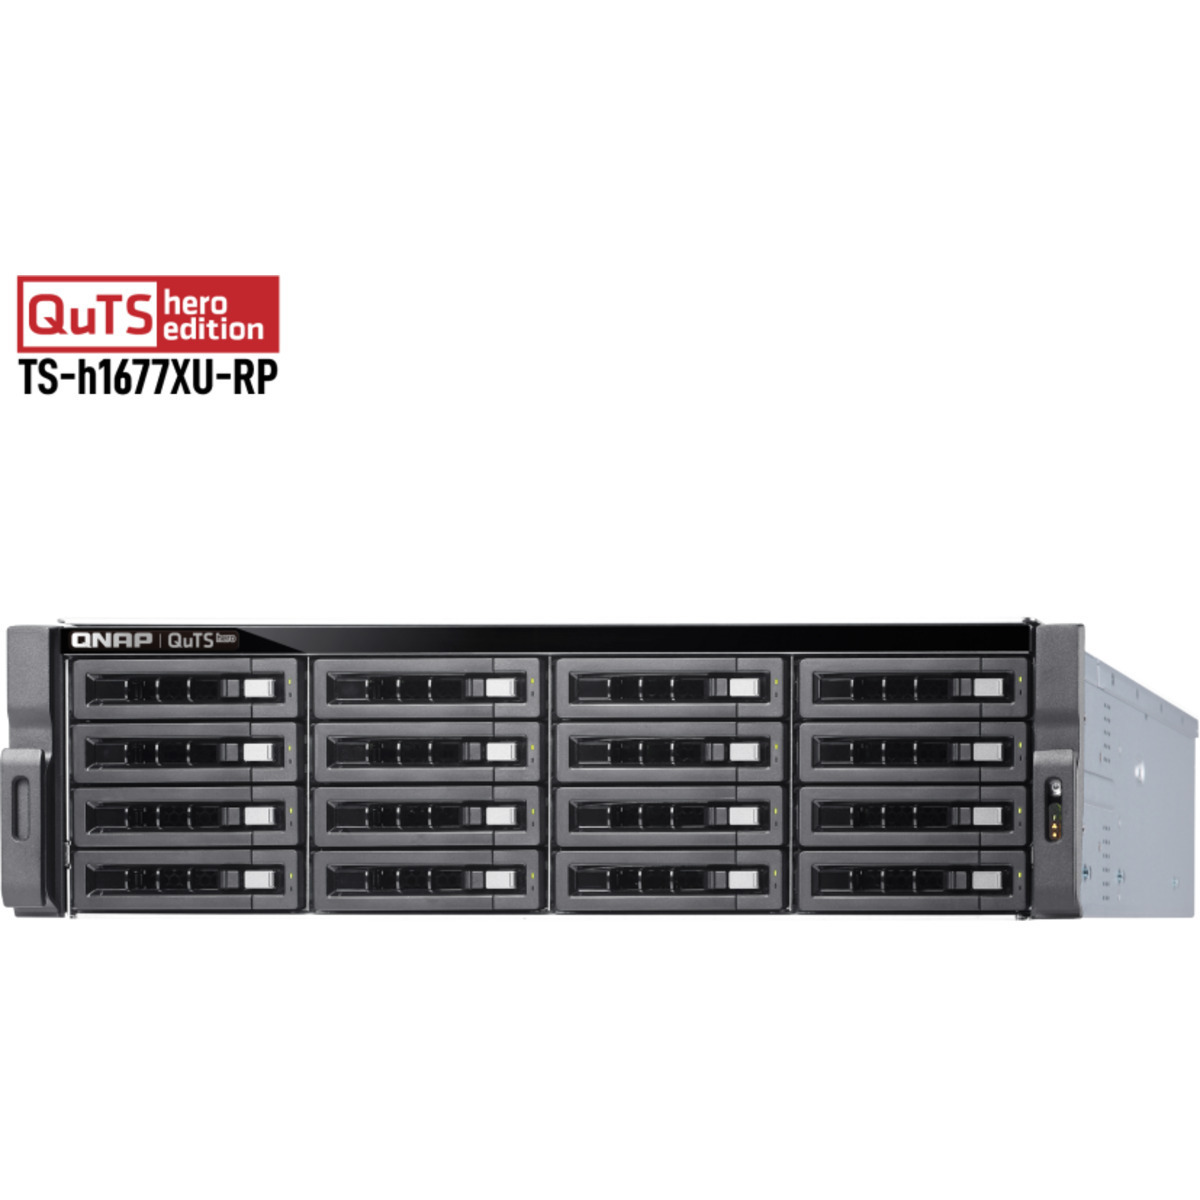 buy QNAP TS-h1677XU-RP QuTS hero Edition 32tb RackMount NAS - Network Attached Storage Device 16x2000gb Seagate IronWolf Pro ST2000NT001 3.5 7200rpm SATA 6Gb/s HDD NAS Class Drives Installed - Burn-In Tested - nas headquarters buy network attached storage server device das new raid-5 free shipping usa spring sale TS-h1677XU-RP QuTS hero Edition